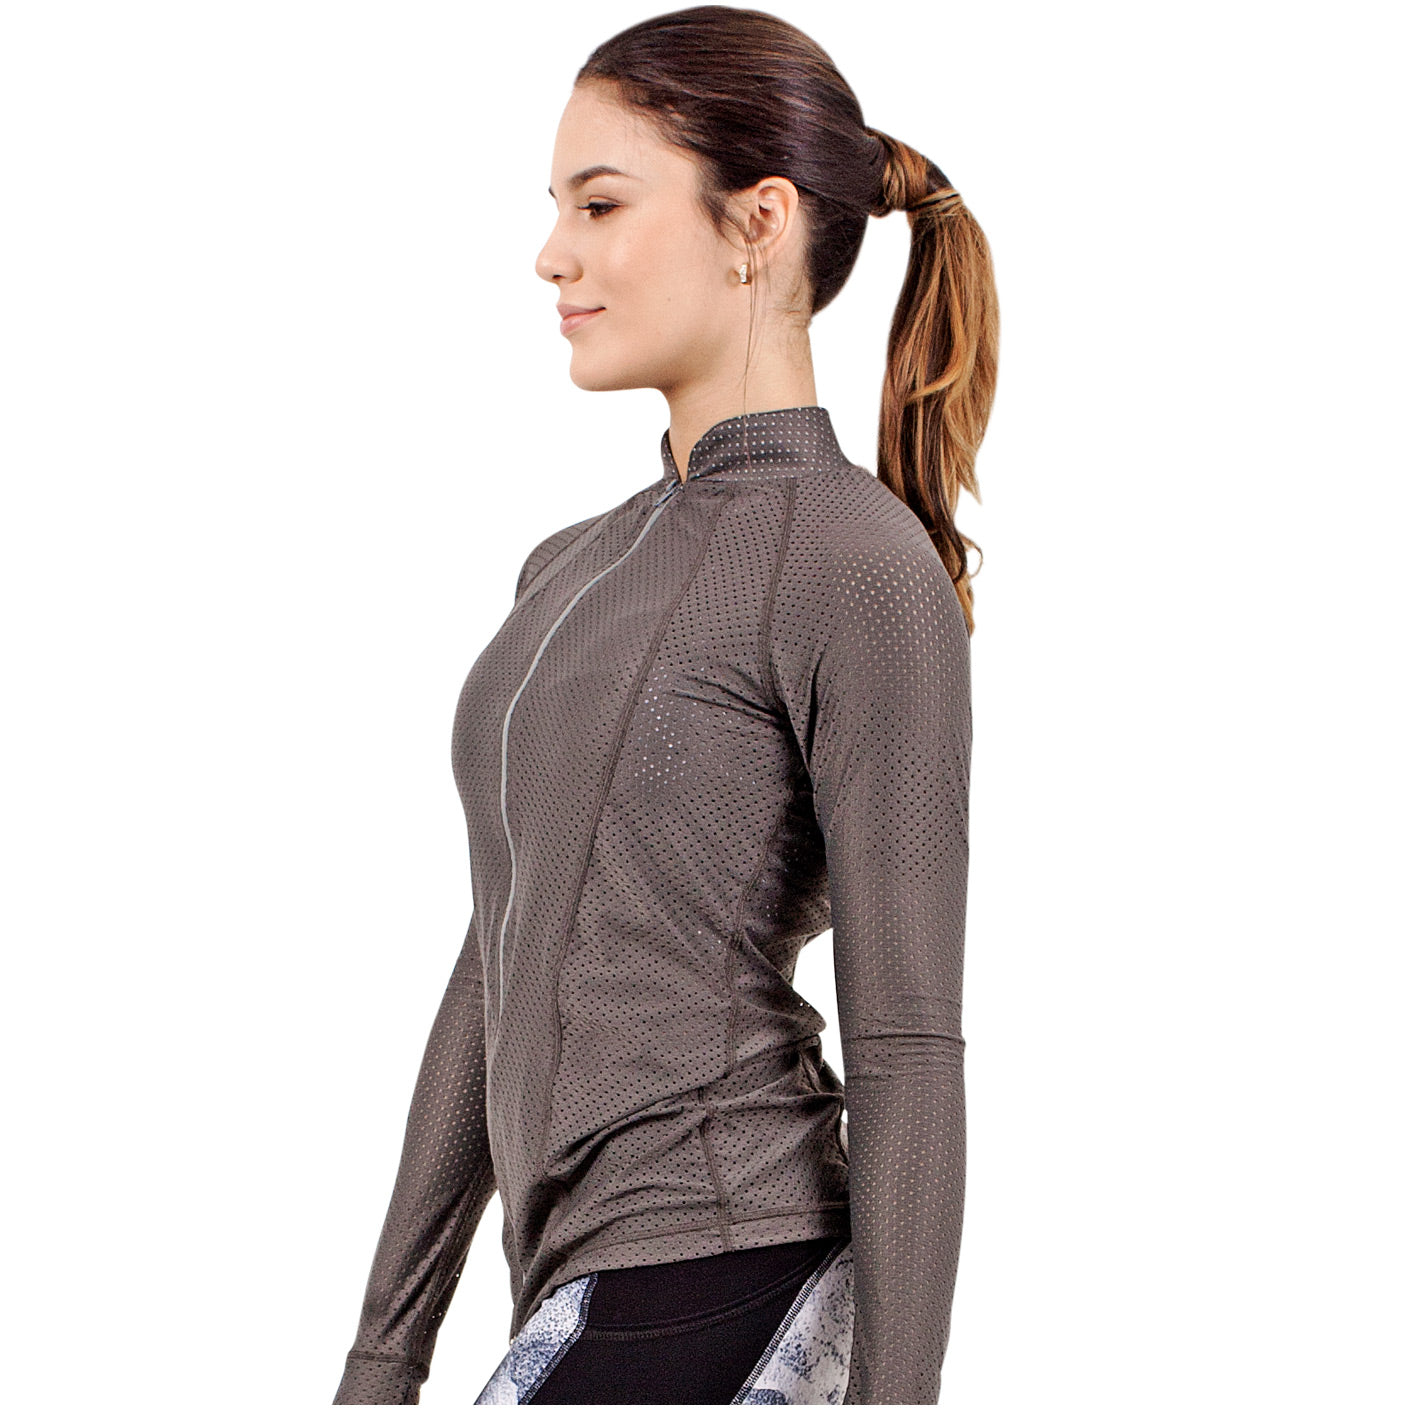 Marble Athleisure Jacket With Zipper - Flexmee US